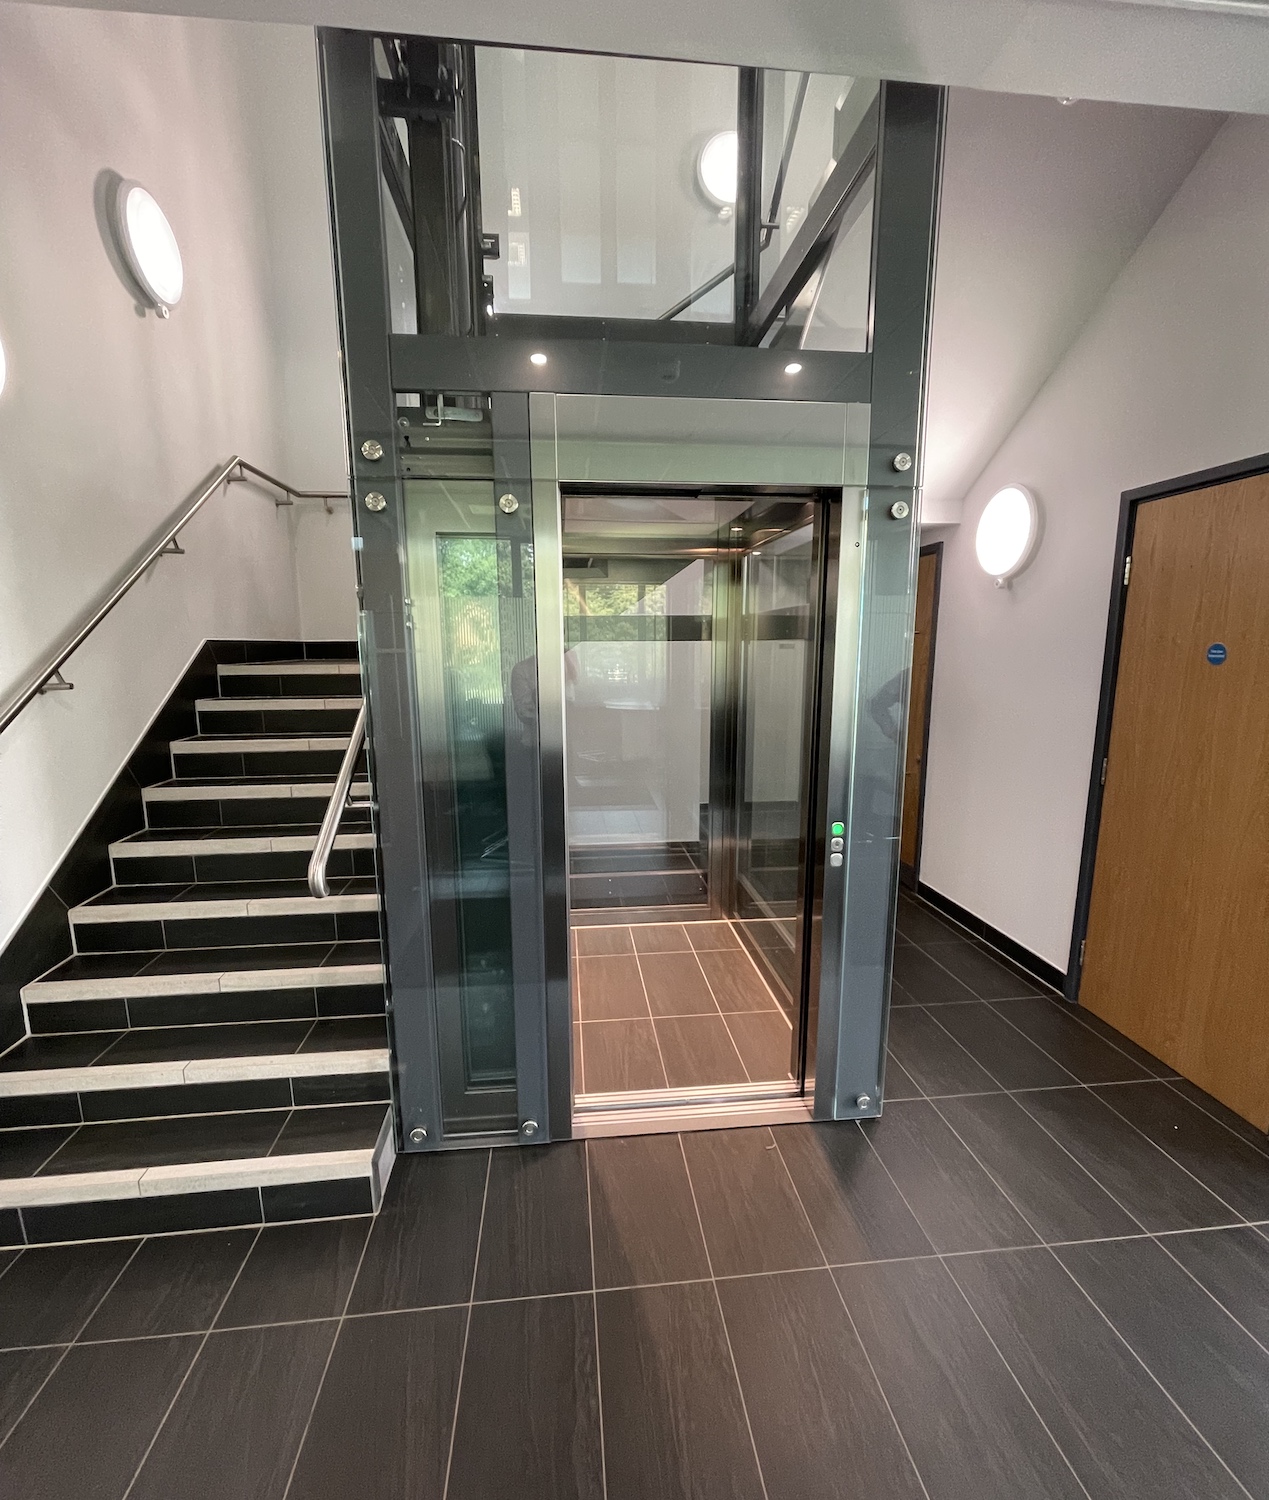 The lift features low pit and headroom making it perfect for new and existing developments